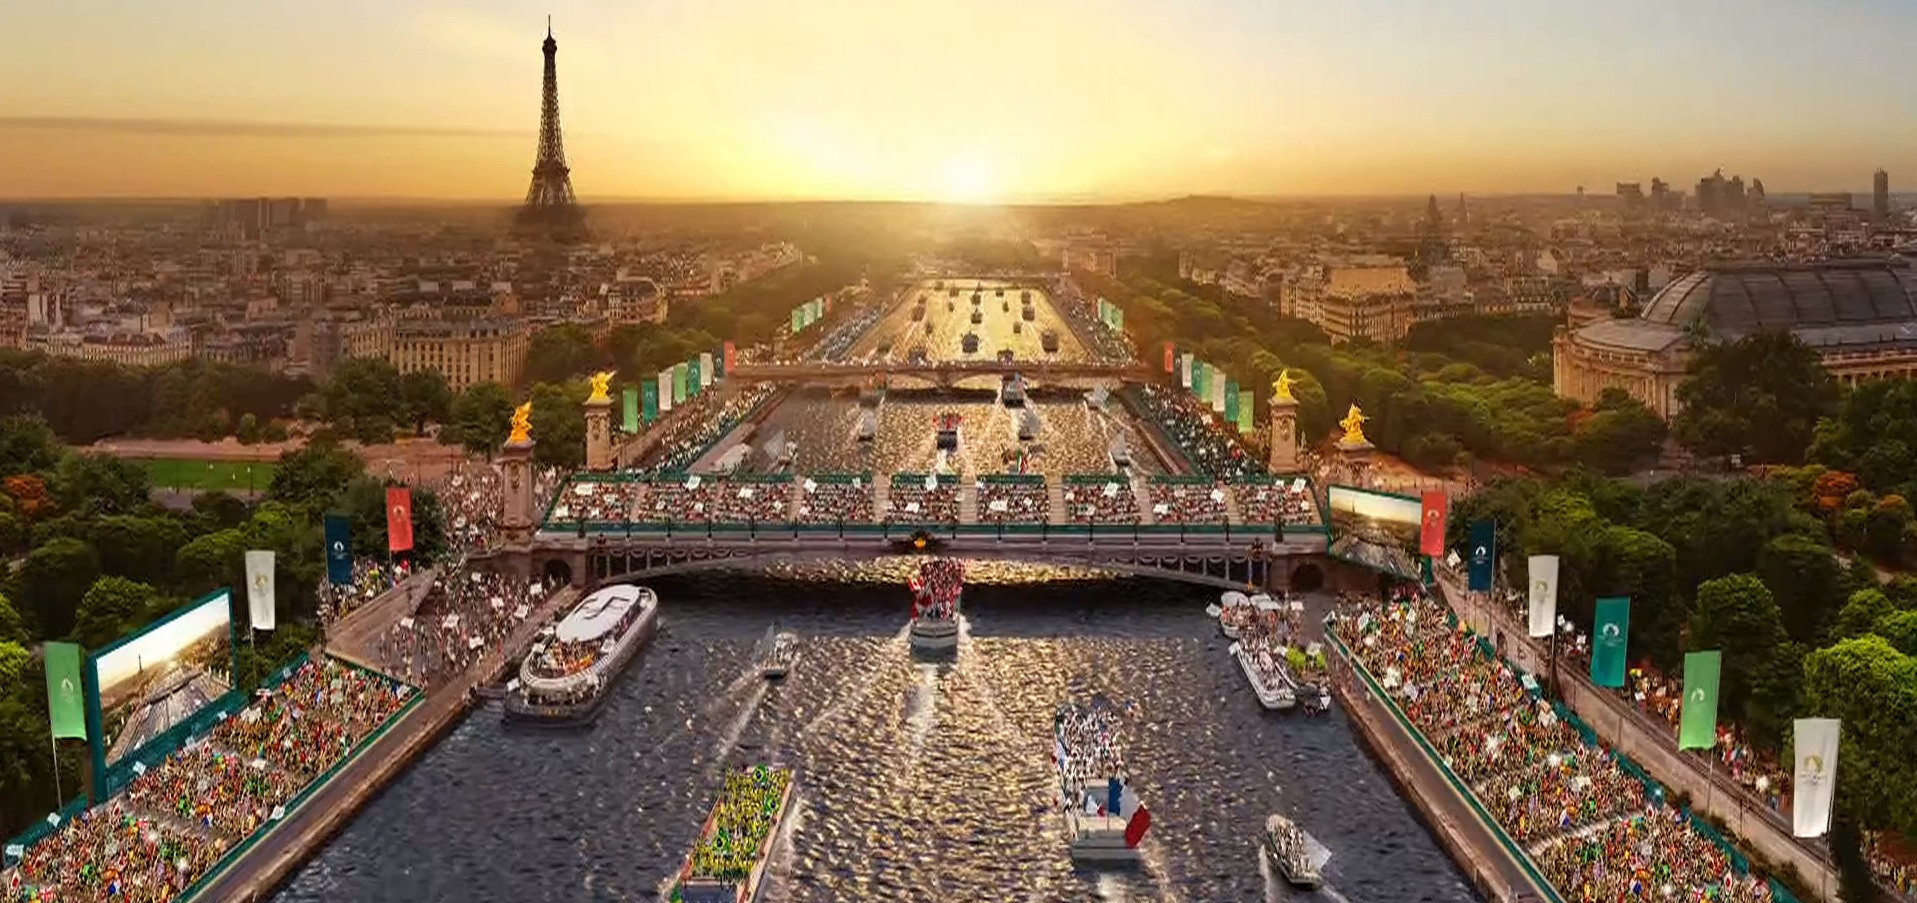 Organisers plan for 600,000 people to line the River Seine for the Paris 2024 Olympics Opening Ceremony ©Paris 2024